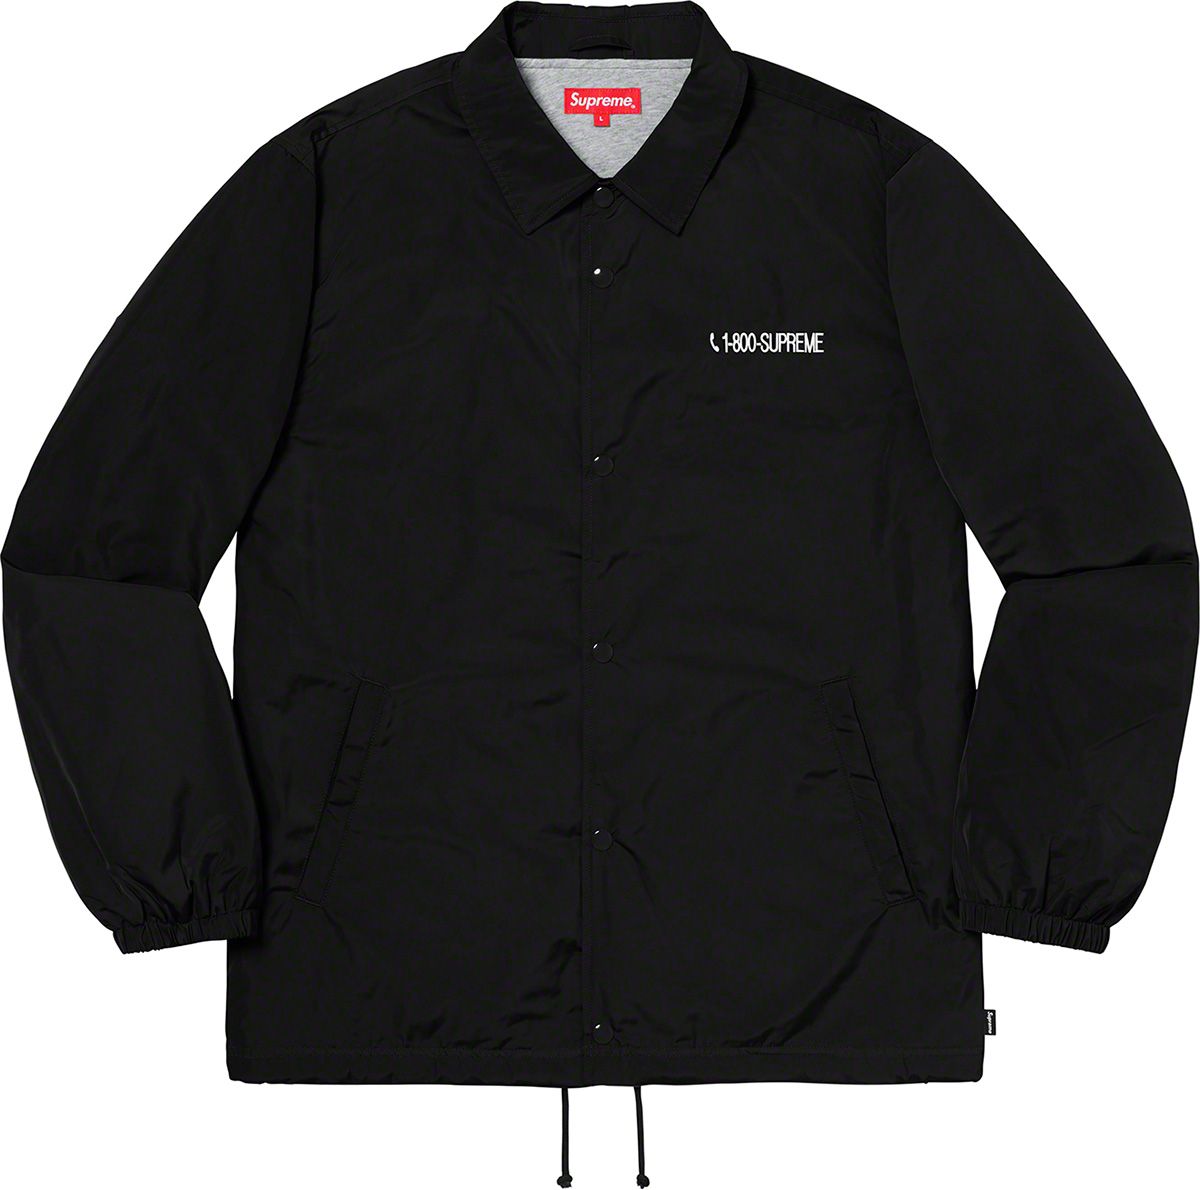 Cop Car Embroidered Work Jacket - Fall/Winter 2019 Preview – Supreme